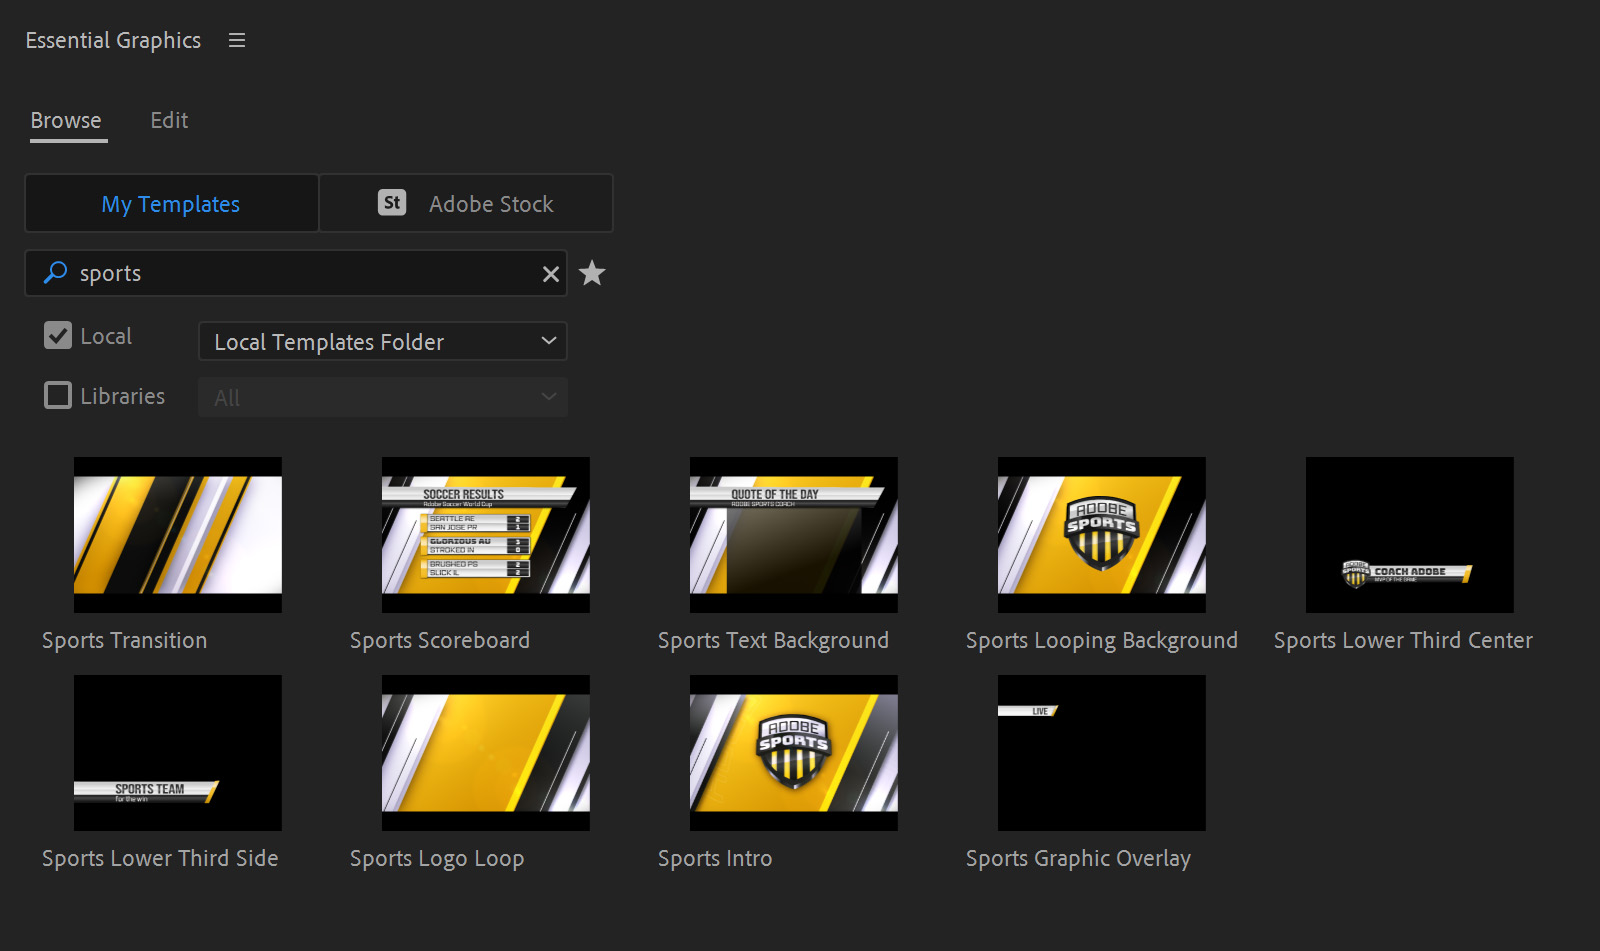 Use the search bar in the Essential Graphics panel to find groups of templates you want to delete, like the Sports ones.